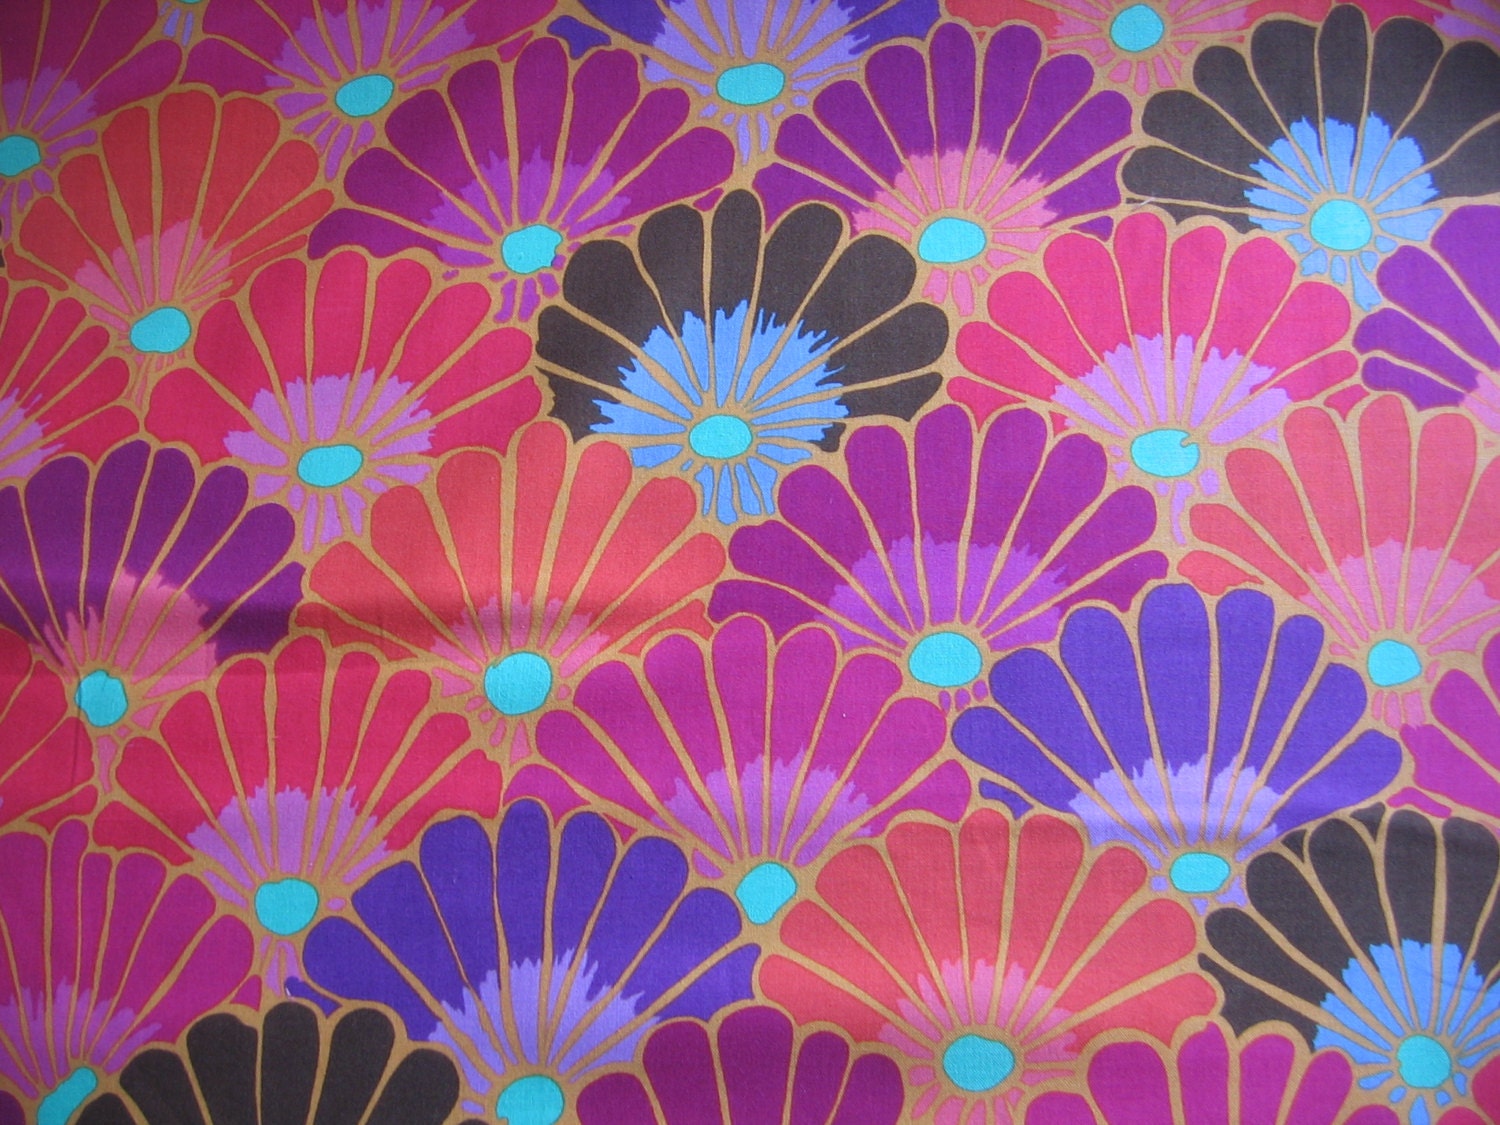 Thousand Flowers in red from the Kaffe Fassett collection